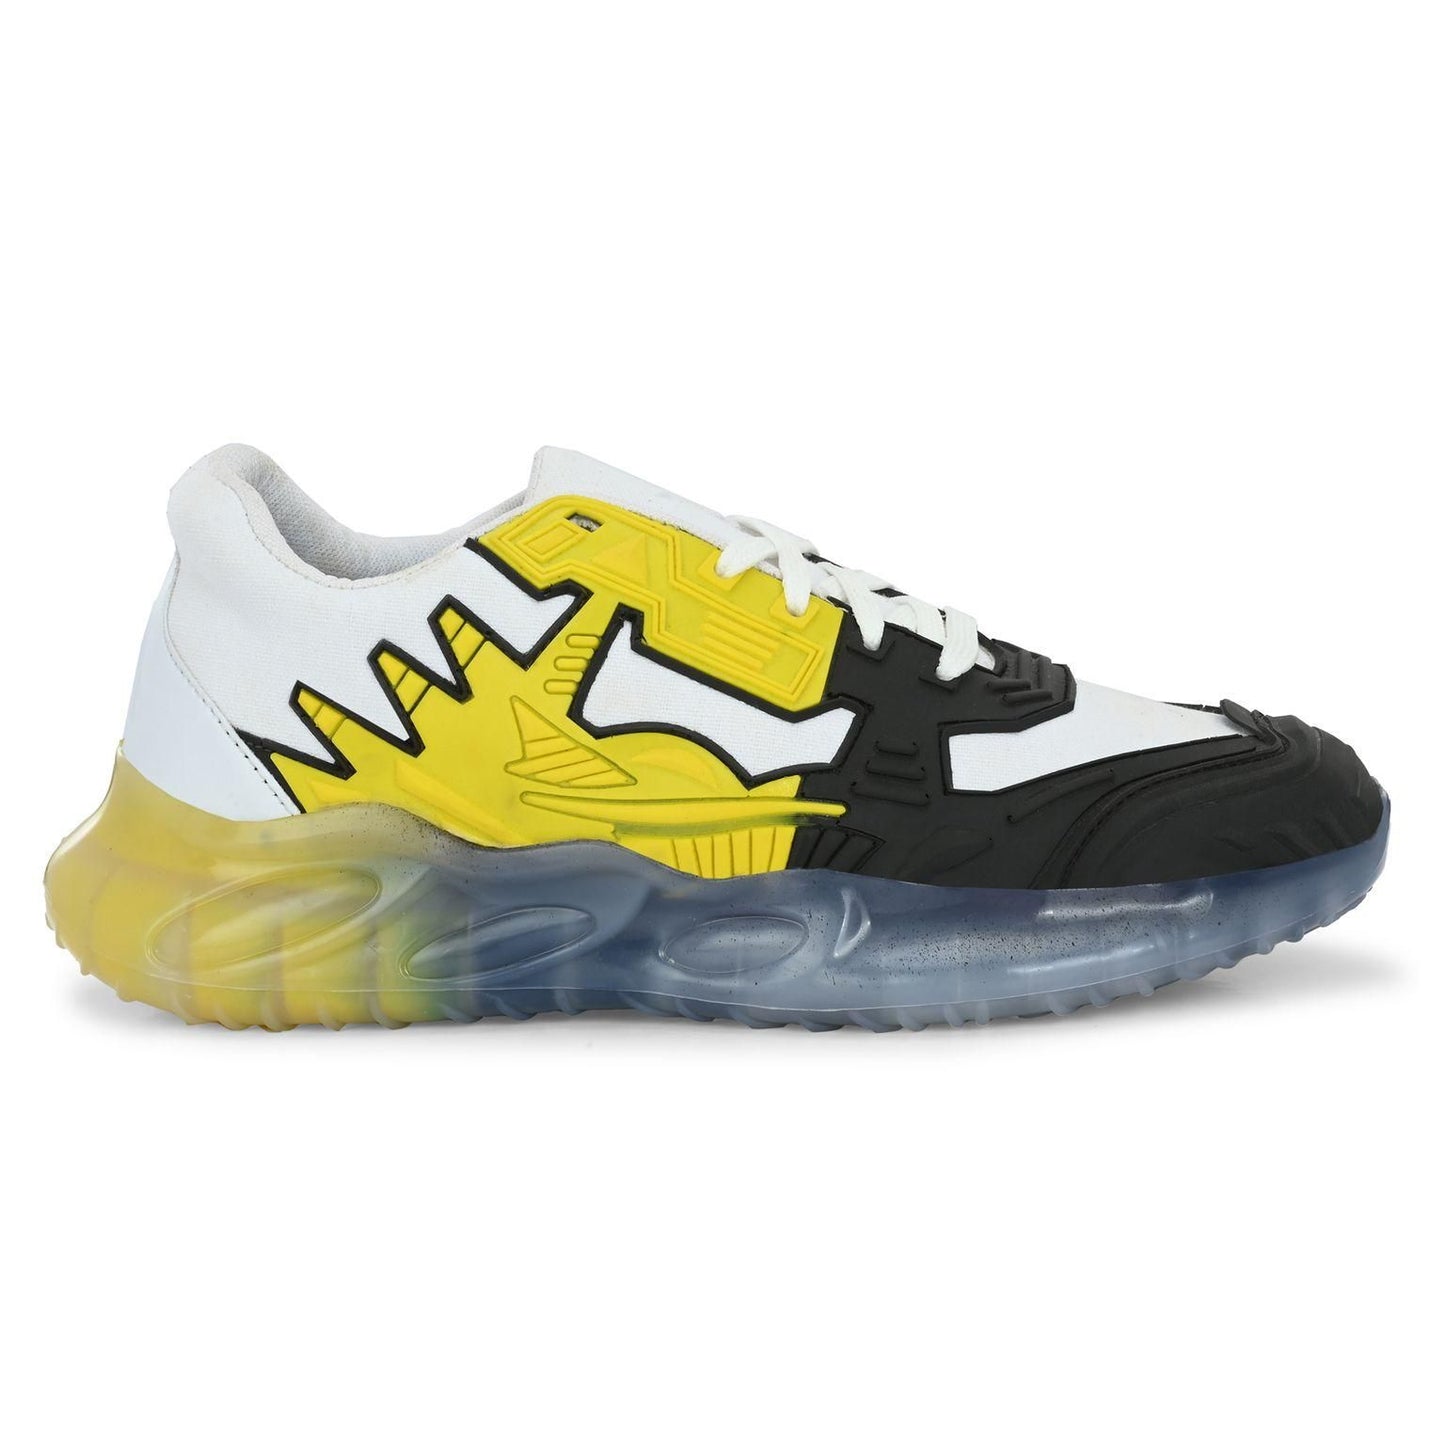 Knight Walkers Yellow Sneakers For Men